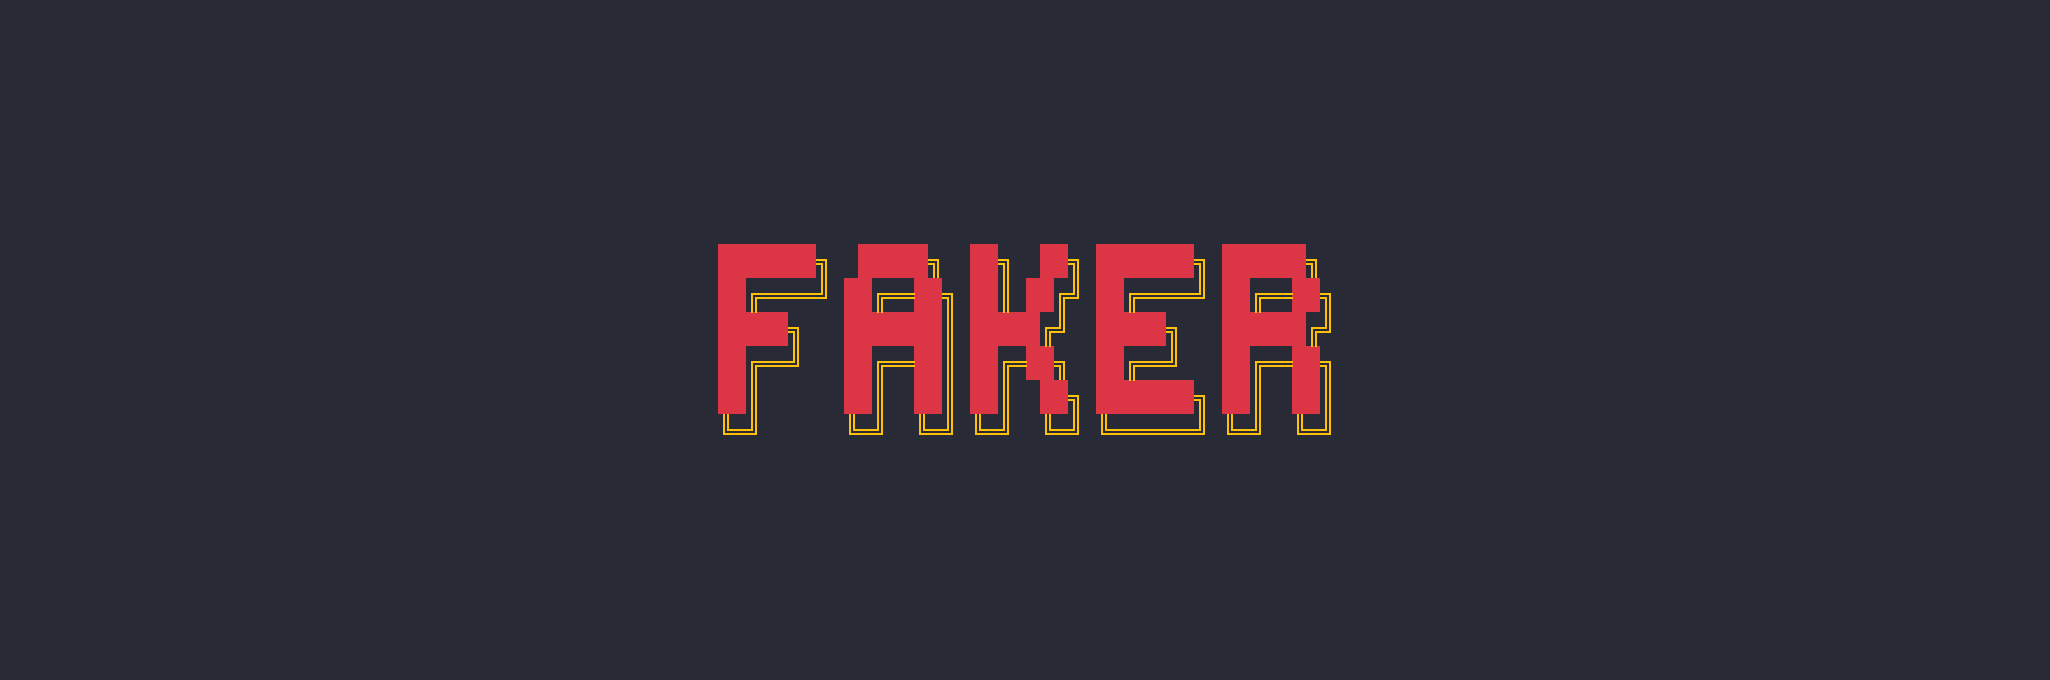 jQuery Plugin To Generate Fake Date In A Form - faker.js